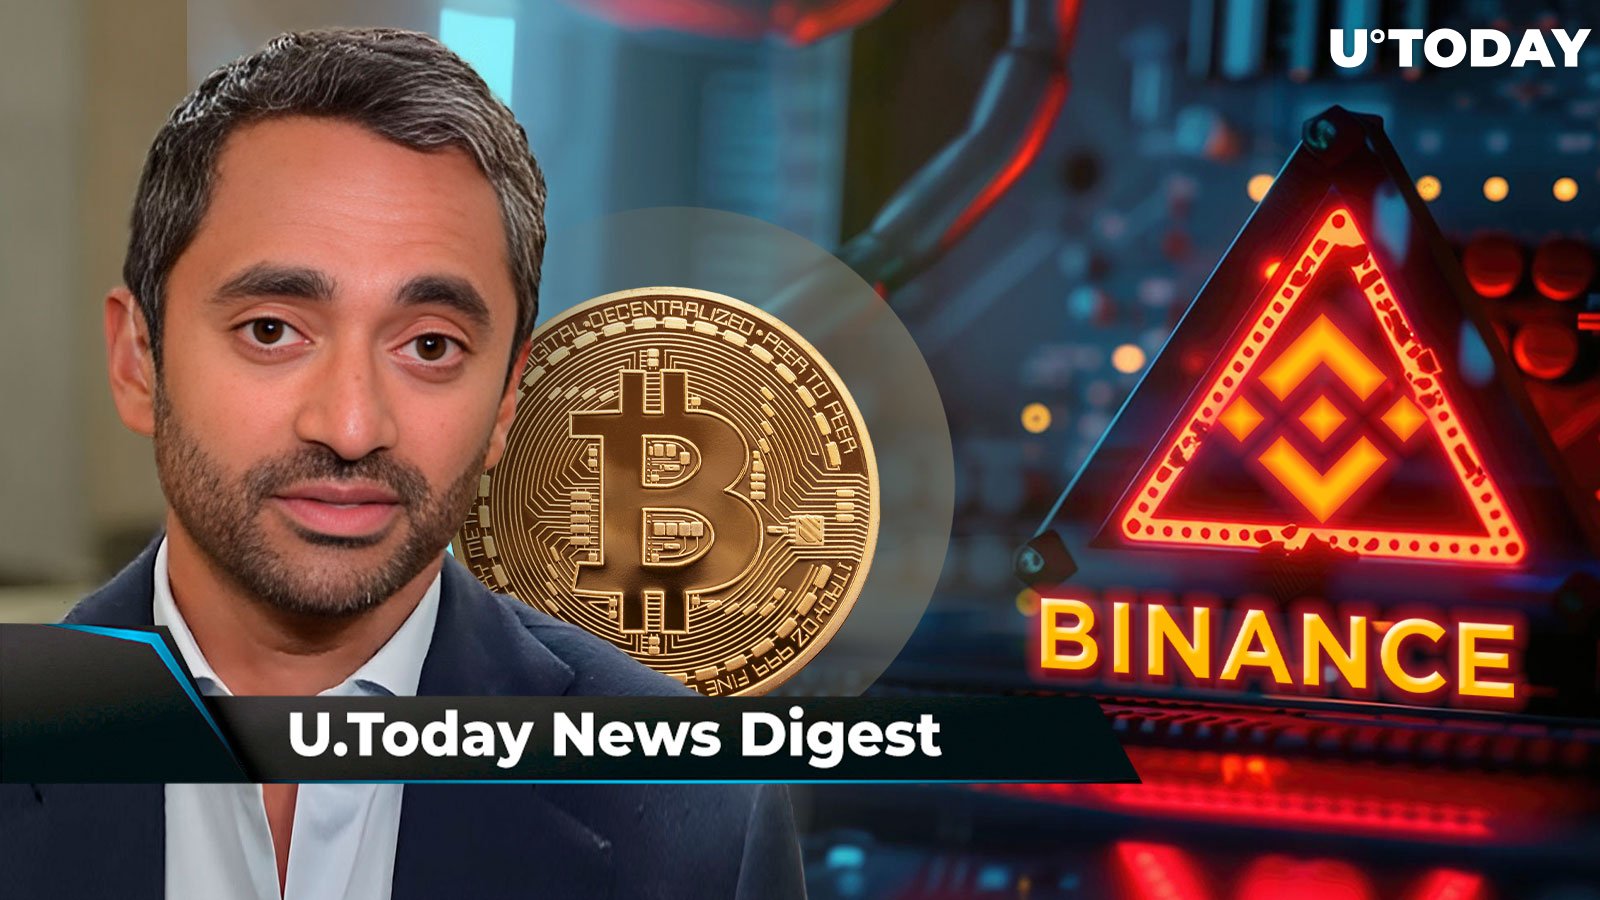 Binance Users Lose Millions After Accounts Hacked, Billionaire Investor Chamath Palihapitiya Issues $500K per BTC Prediction: Crypto News Digest by U.Today